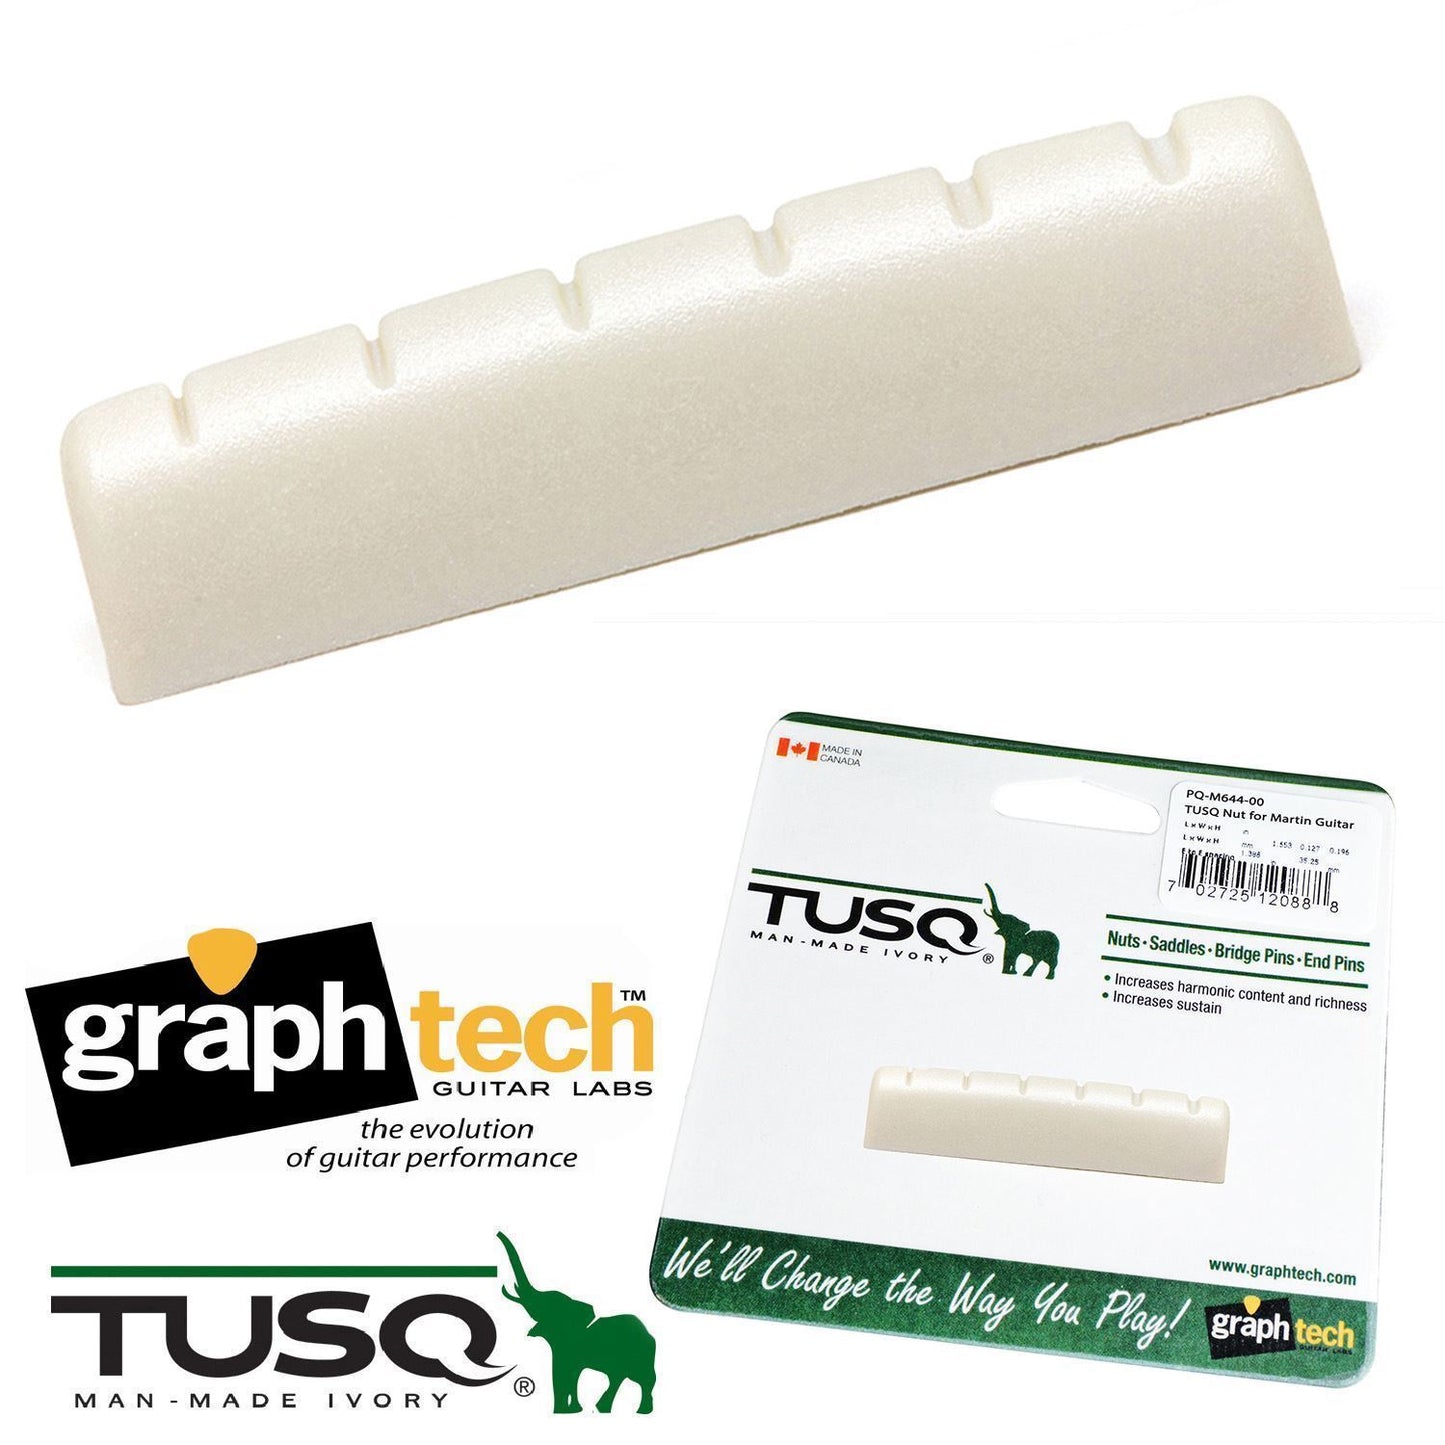 Graphtech PQ-M644-00 Slotted Tusq Nut 3/4 inch for Martin Guitars